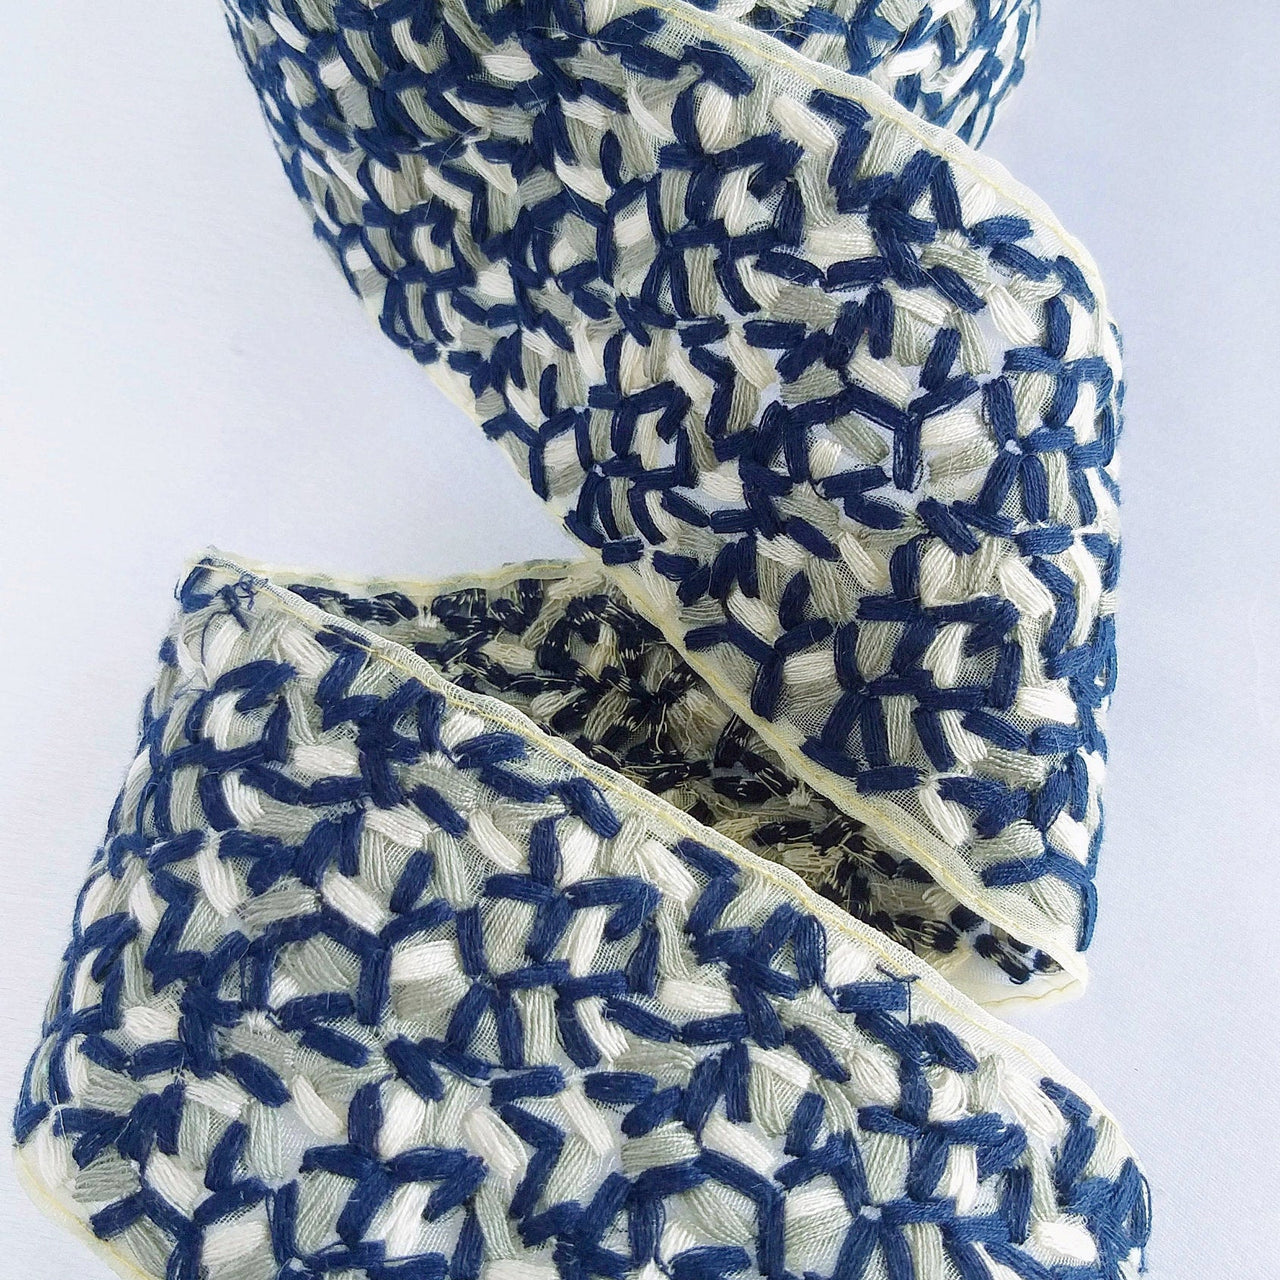 Beige Sheer Tissue Fabric Trim With Cotton Thread Embroidery In Blue, Grey And Off White, Fabric Lace